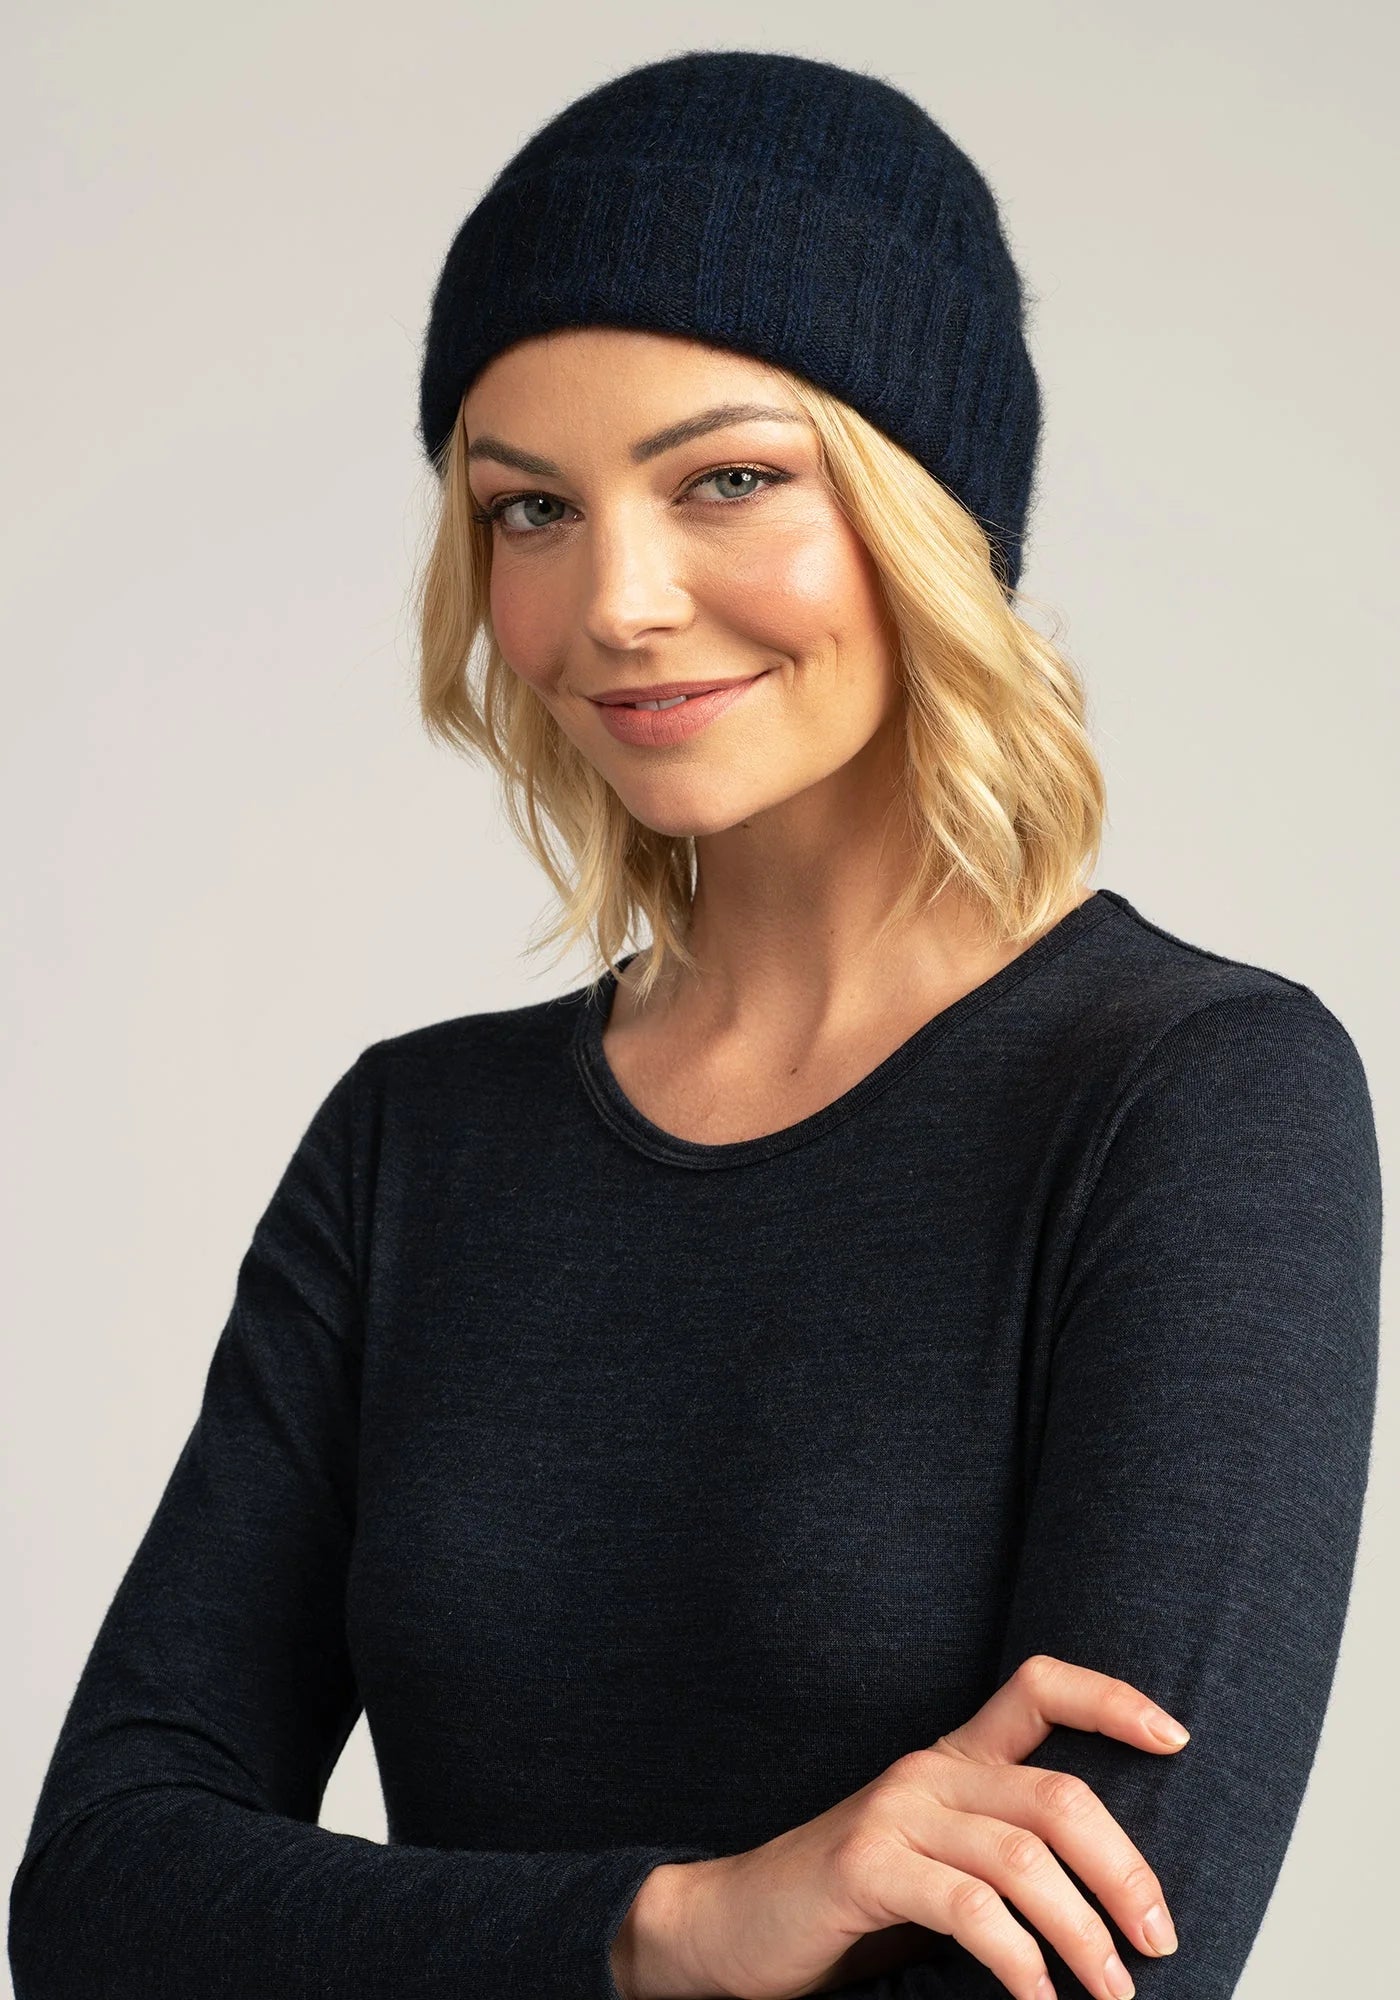 Beat the chill with our merino wool ribbed beanie. Soft, cozy, and oh-so-stylish!